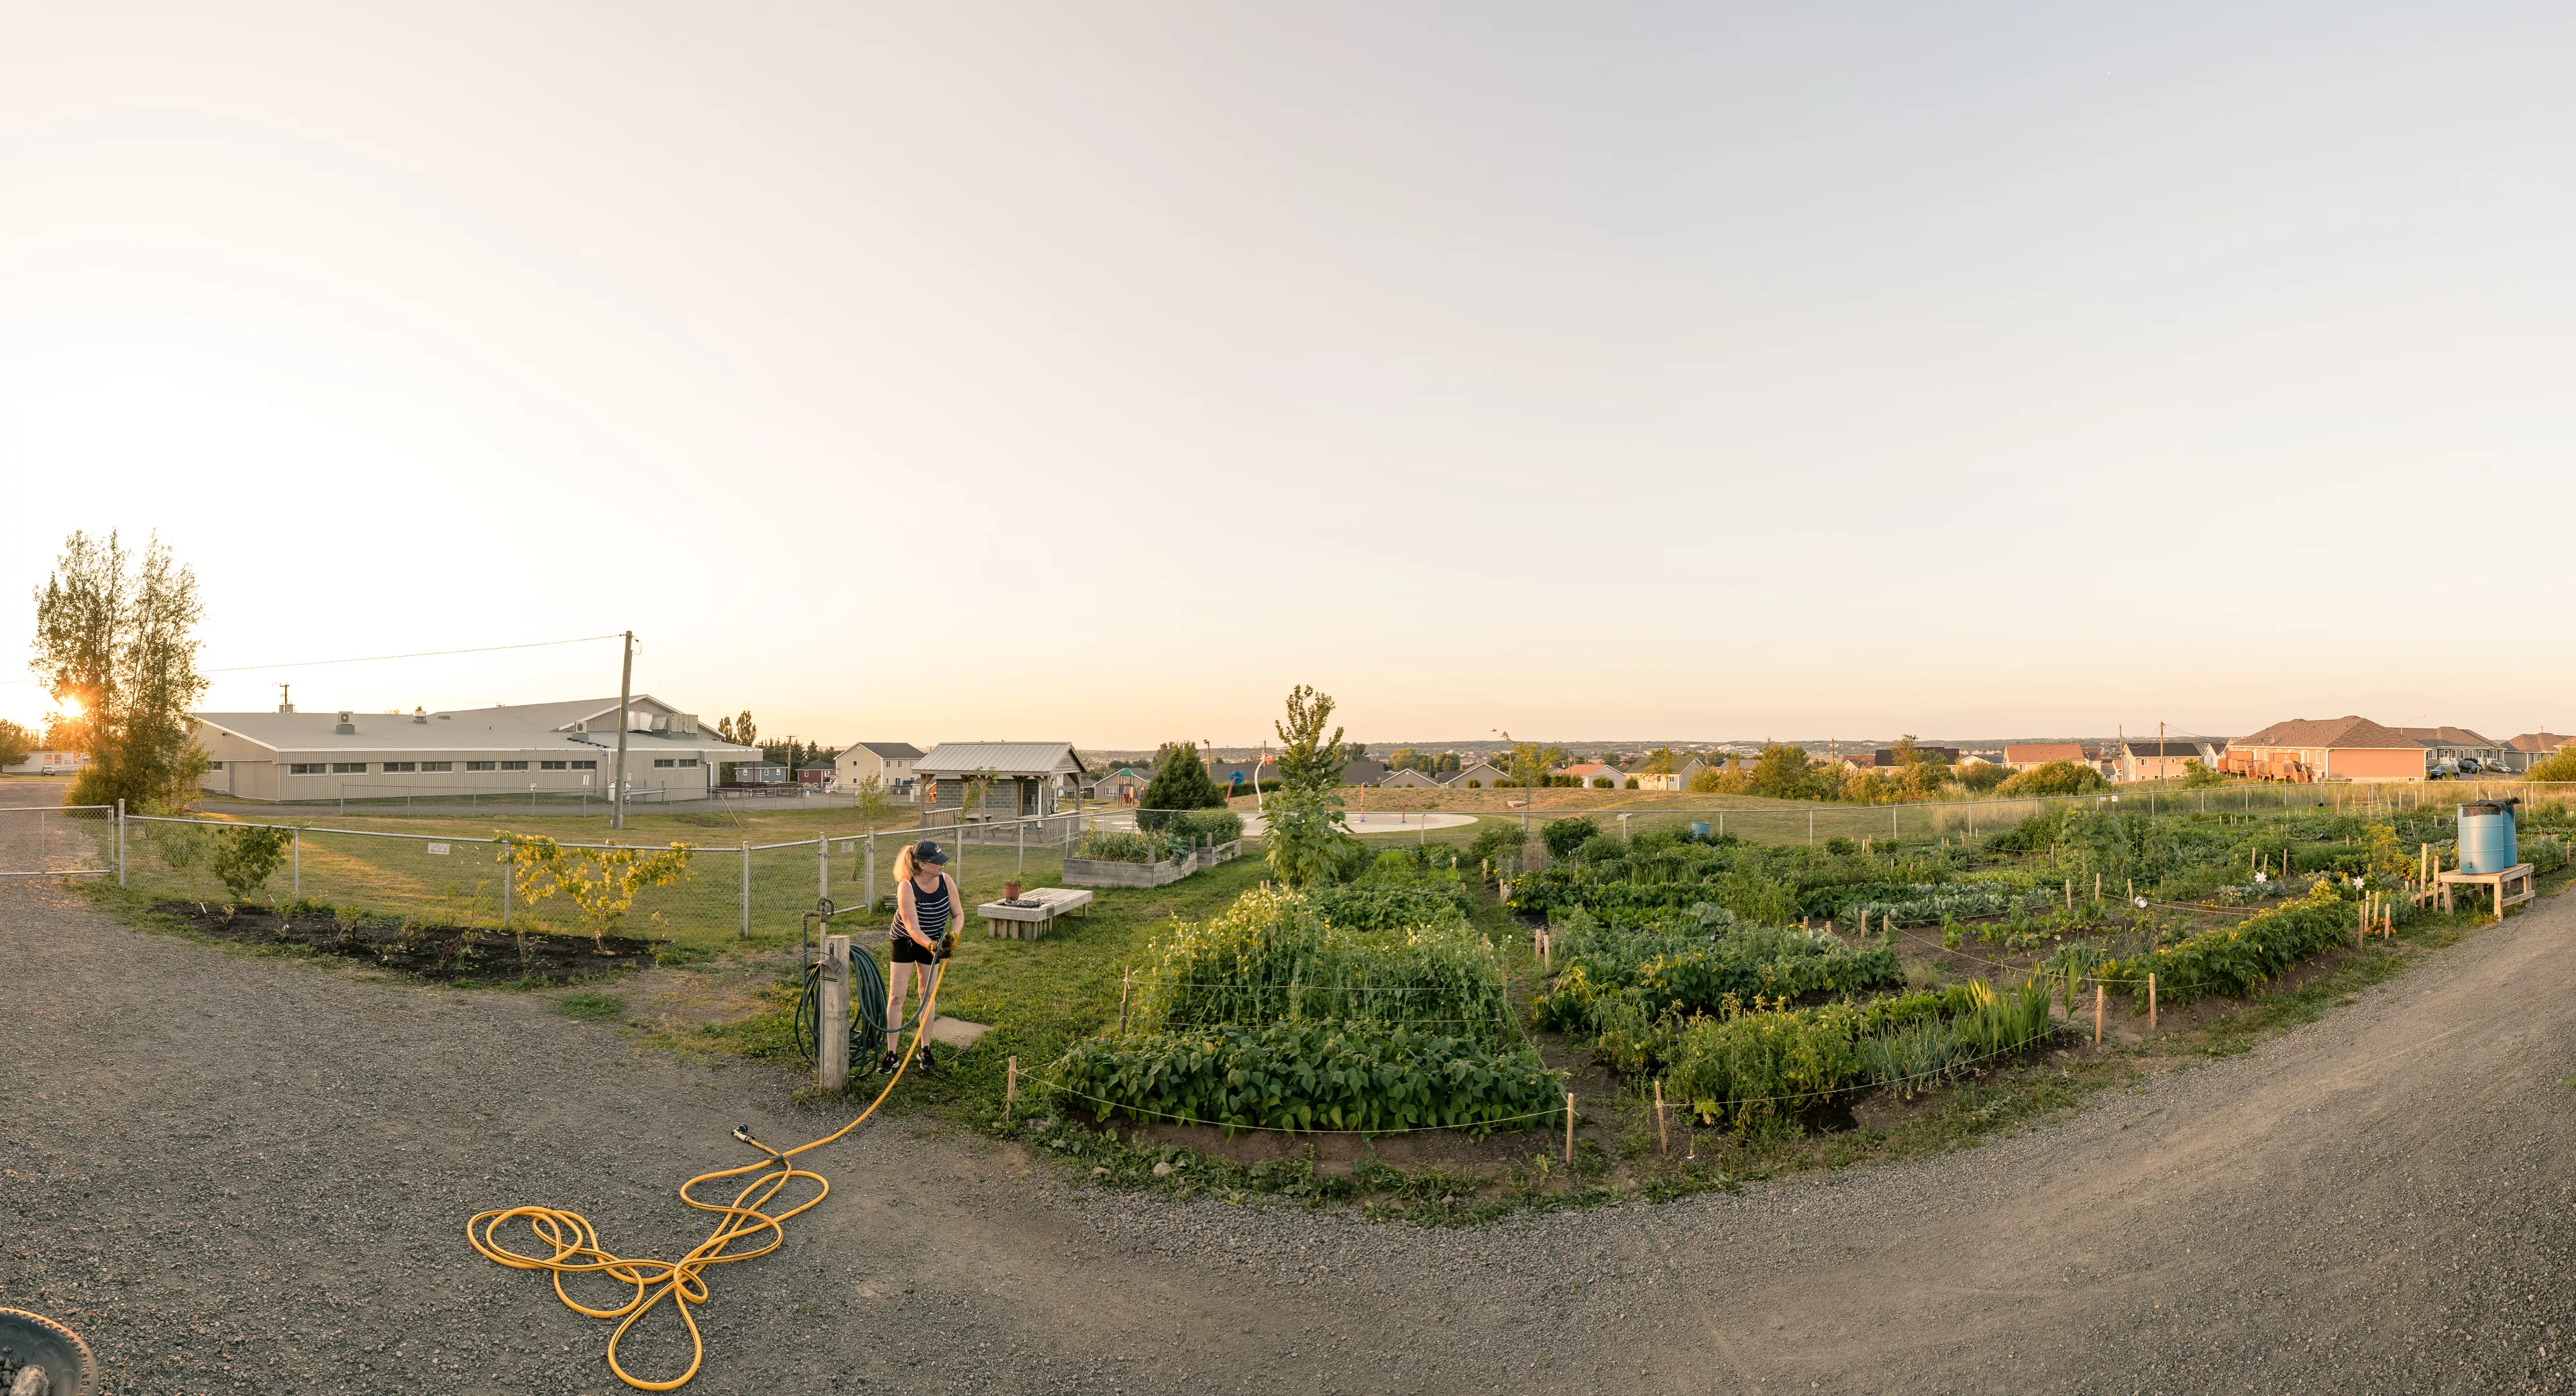 Panoramic view of a building and community garden next to it